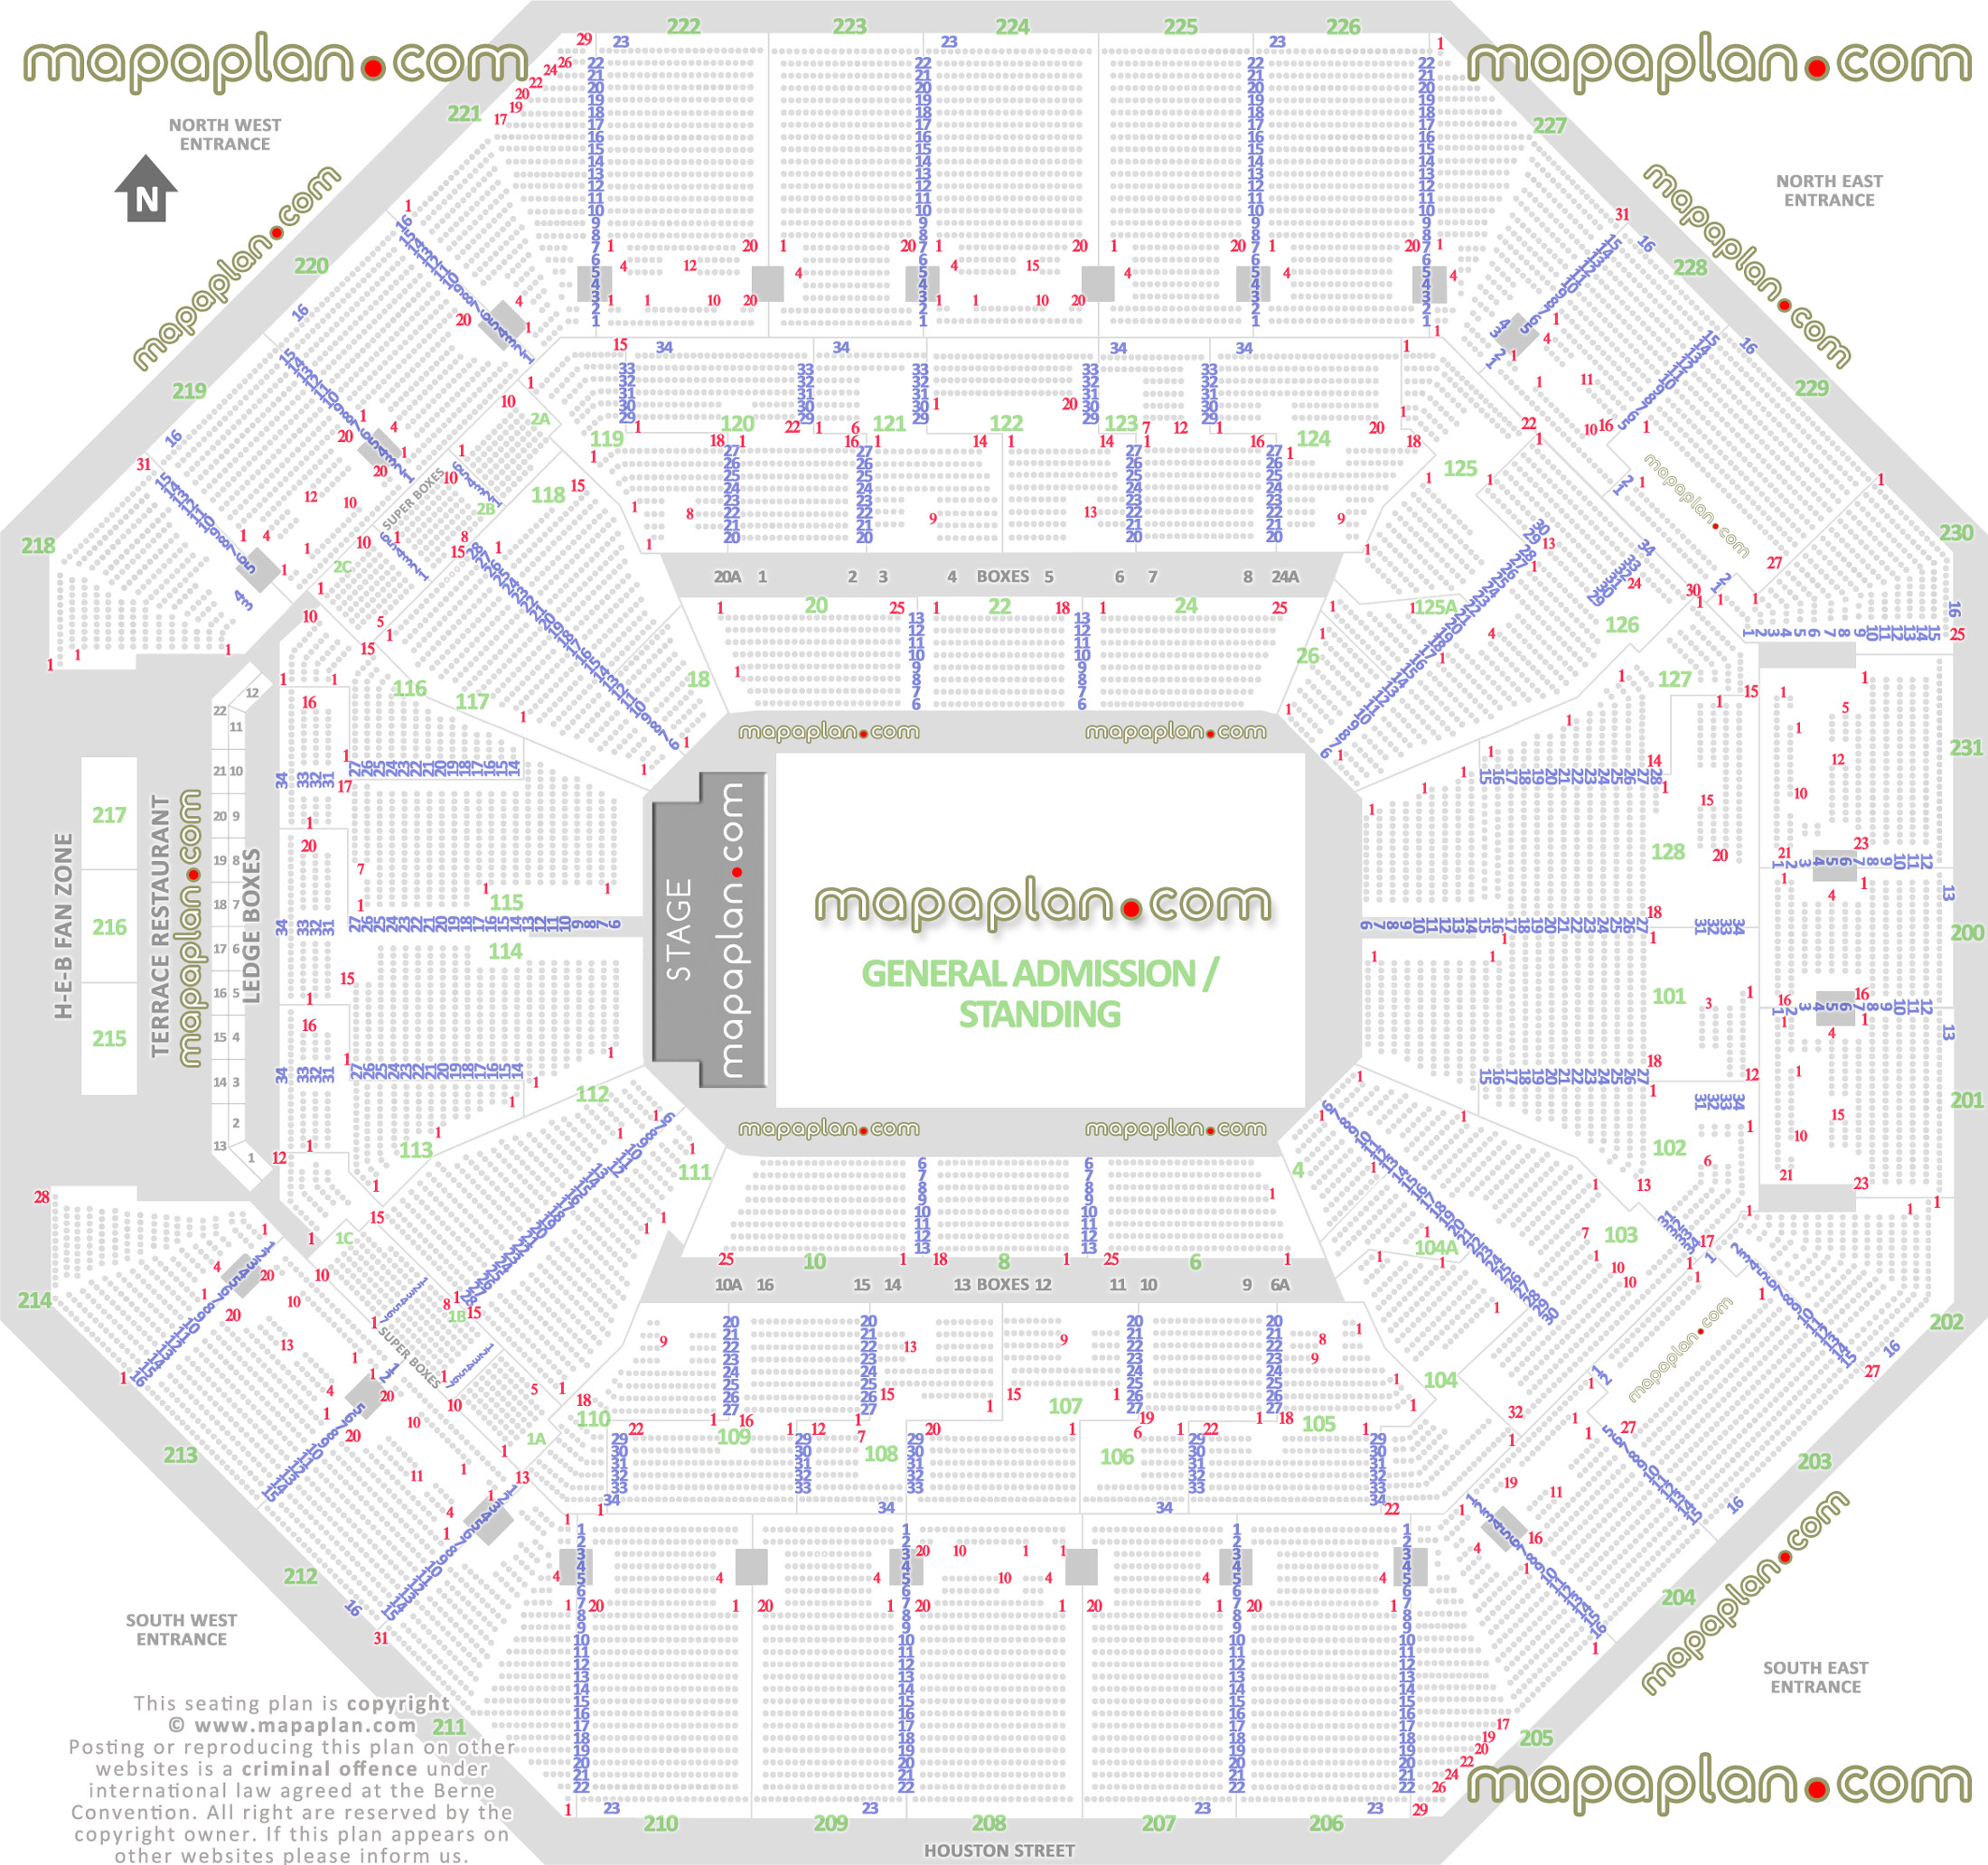 general admission ga floor standing concert capacity plan Frost Bank Center san antonio texas concert stage floor pit plan sections 101 102 103 104 104a 105 106 107 108 109 110 111 112 113 114 115 116 117 118 119 120 121 122 123 124 125 125a 126 127 128 129 130 131 San Antonio Frost Bank Center seating chart